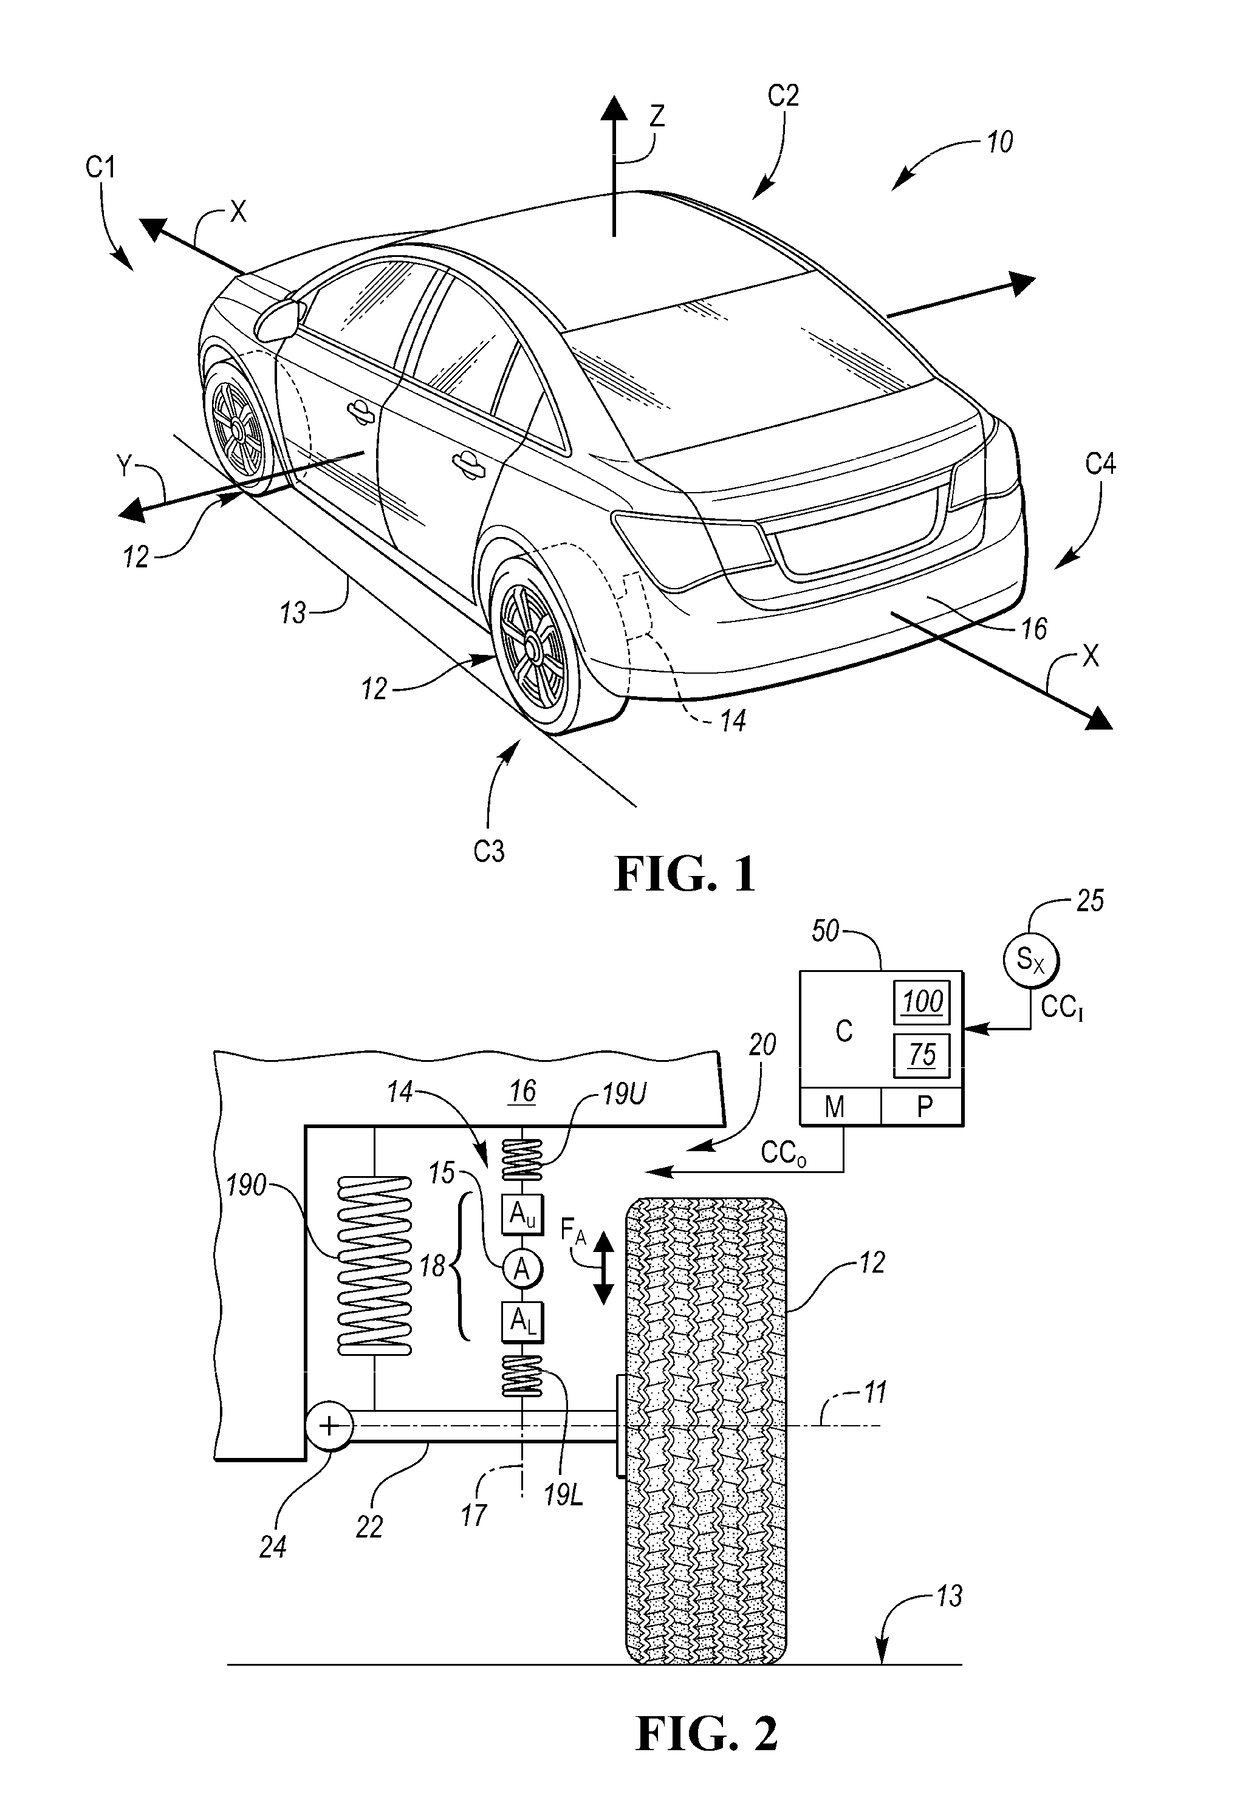 Vehicle with suspension force decoupling system